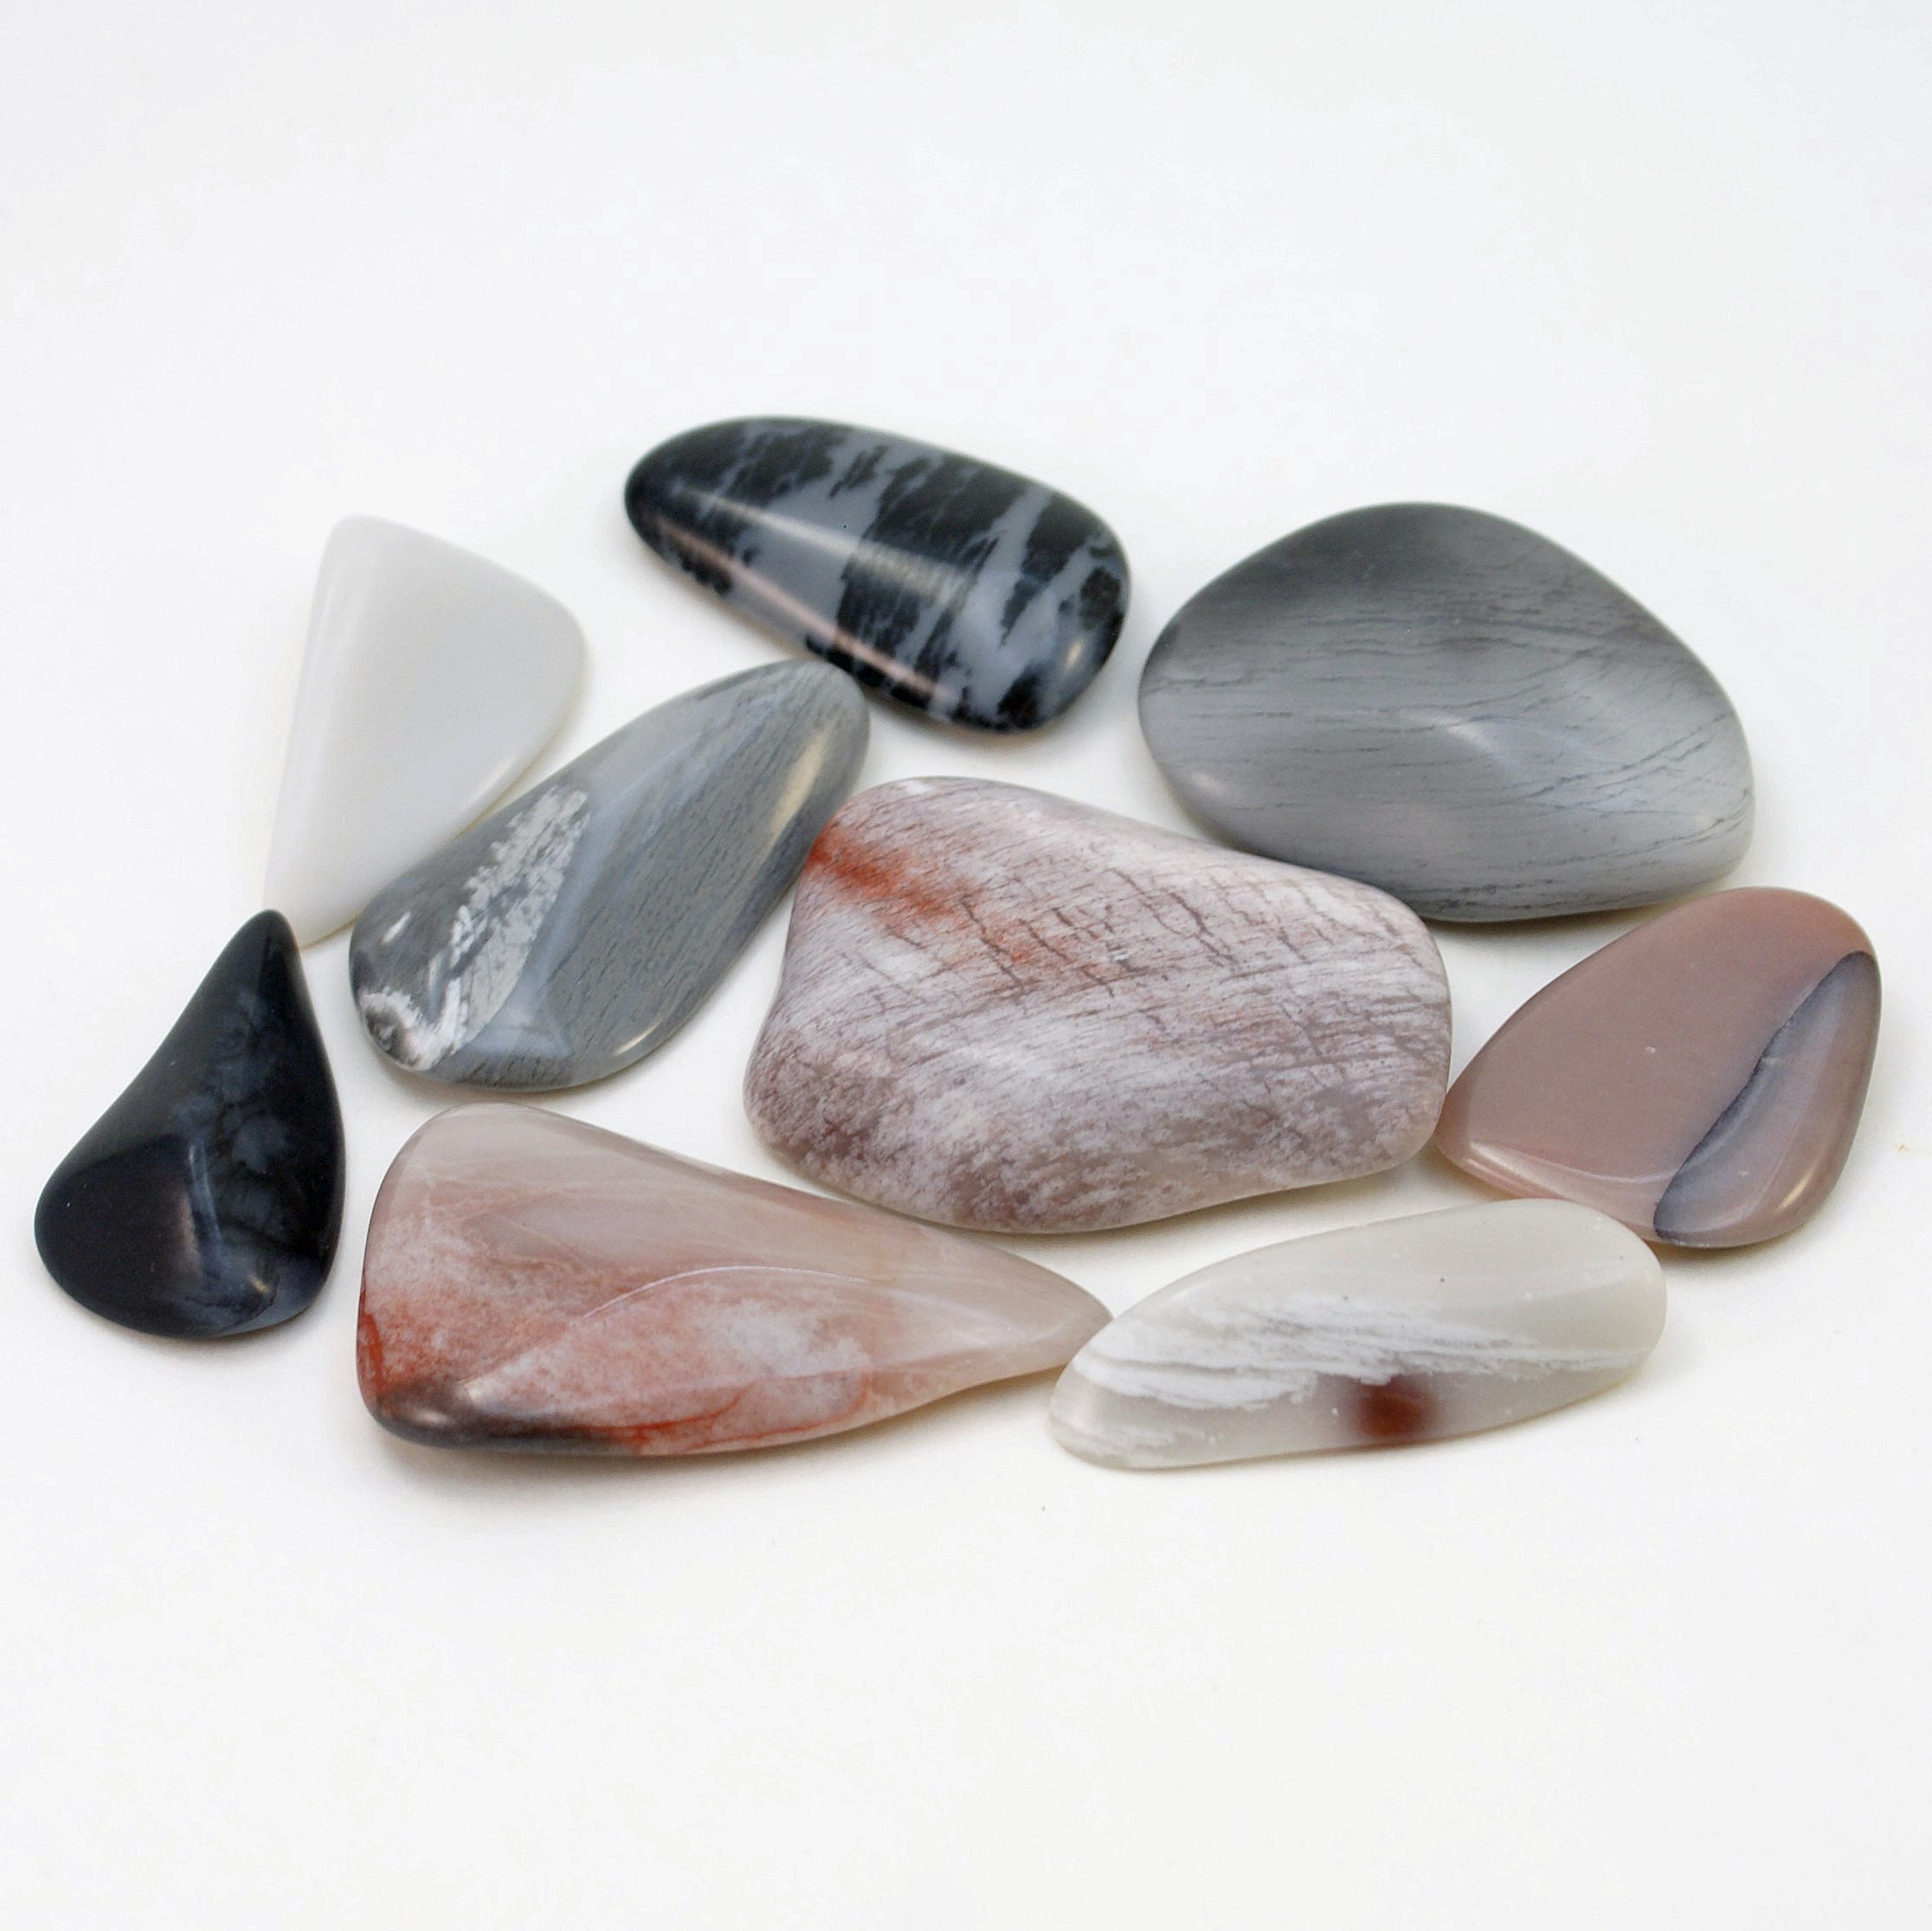 Group of 9 tumbled multi-colored novaculite stones